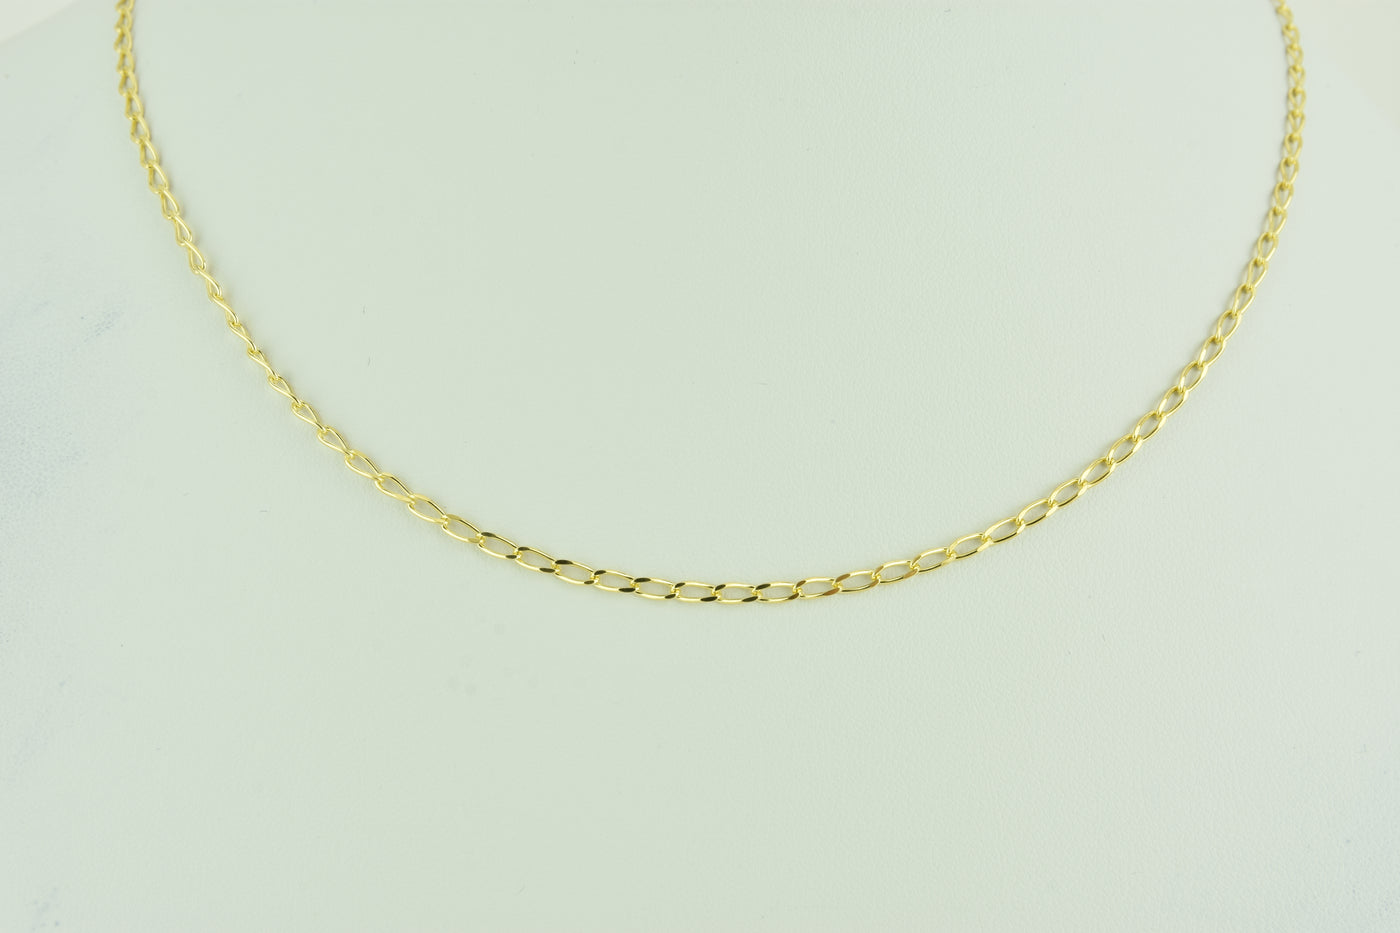 Mini Open Link Sterling Silver Chain with Yellow Gold plate